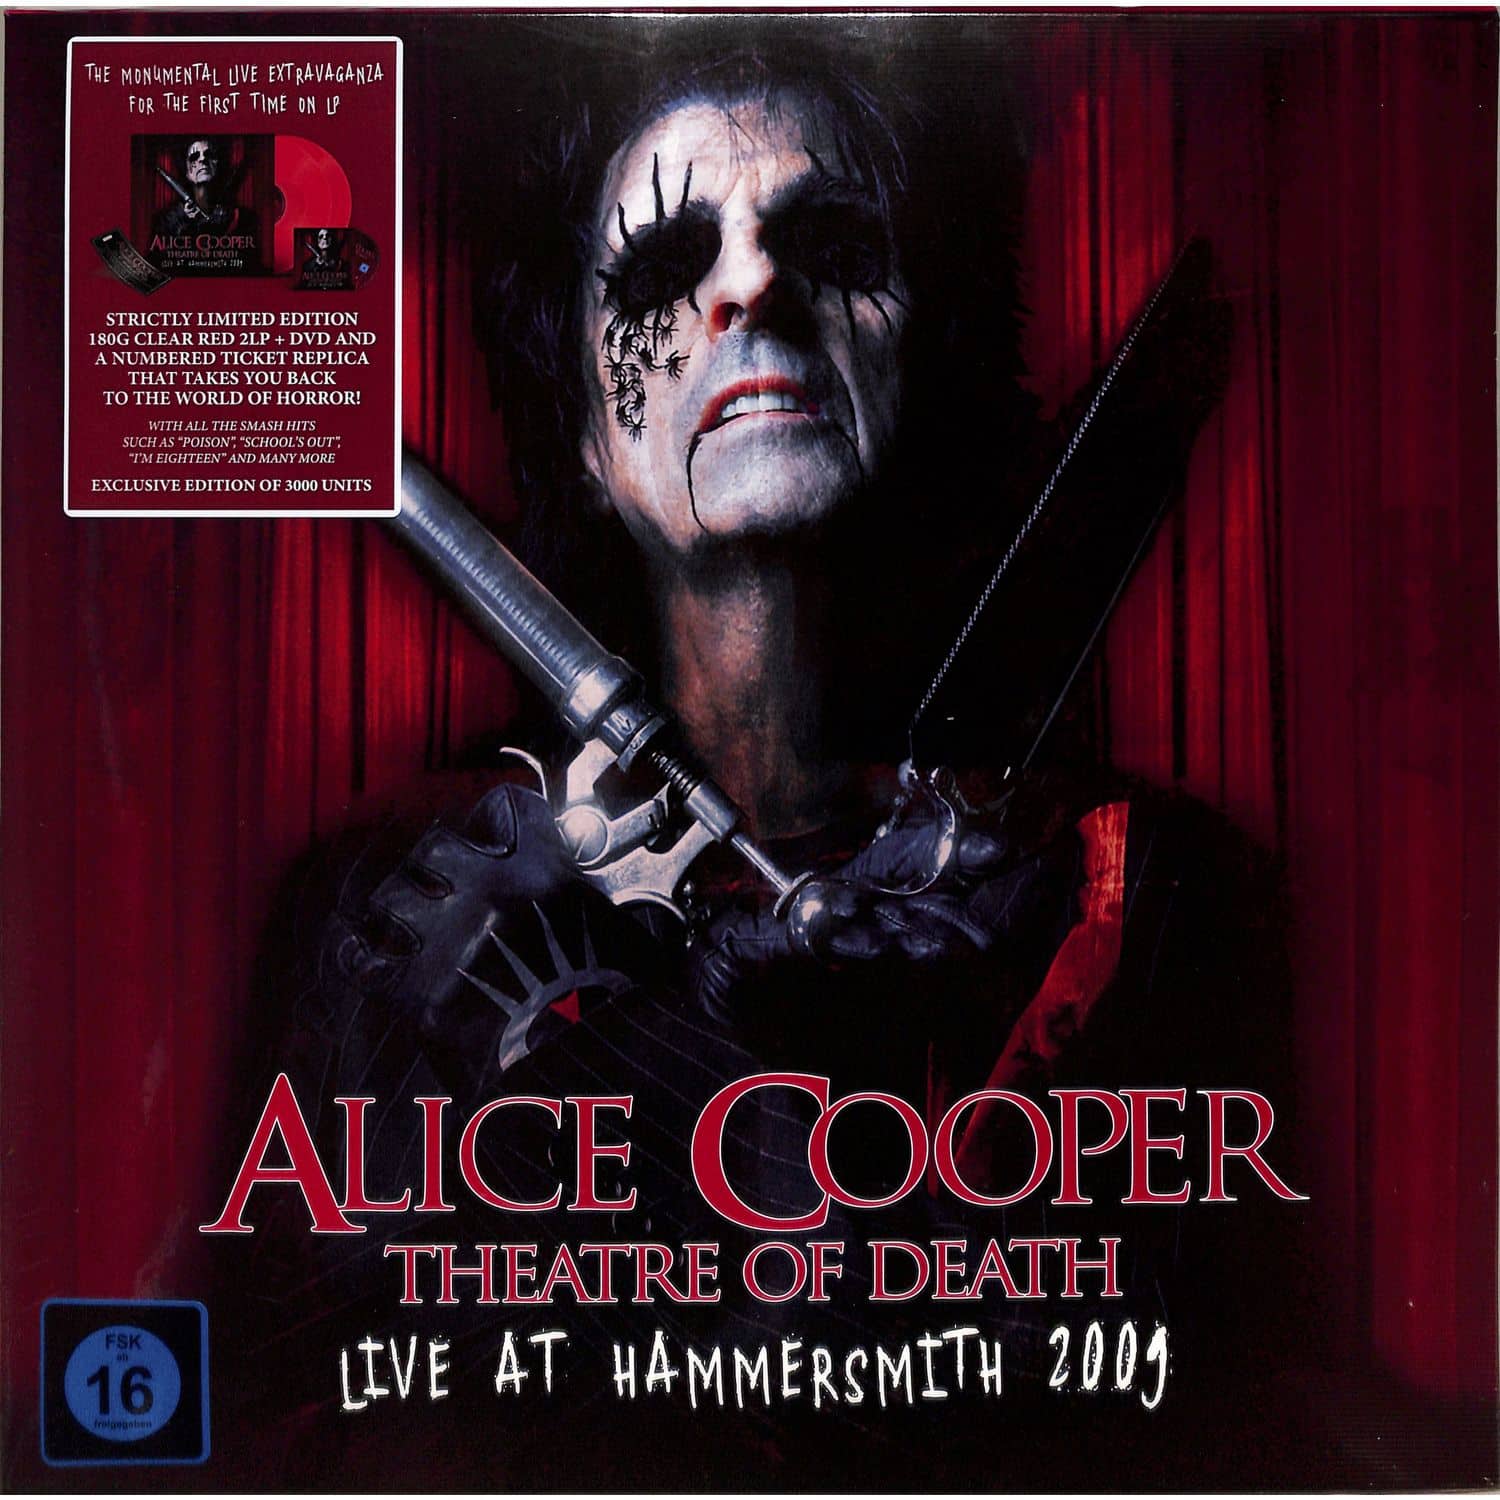 Alice Cooper - THEATRE OF DEATH - LIVE AT HAMMERSMITH 2009 